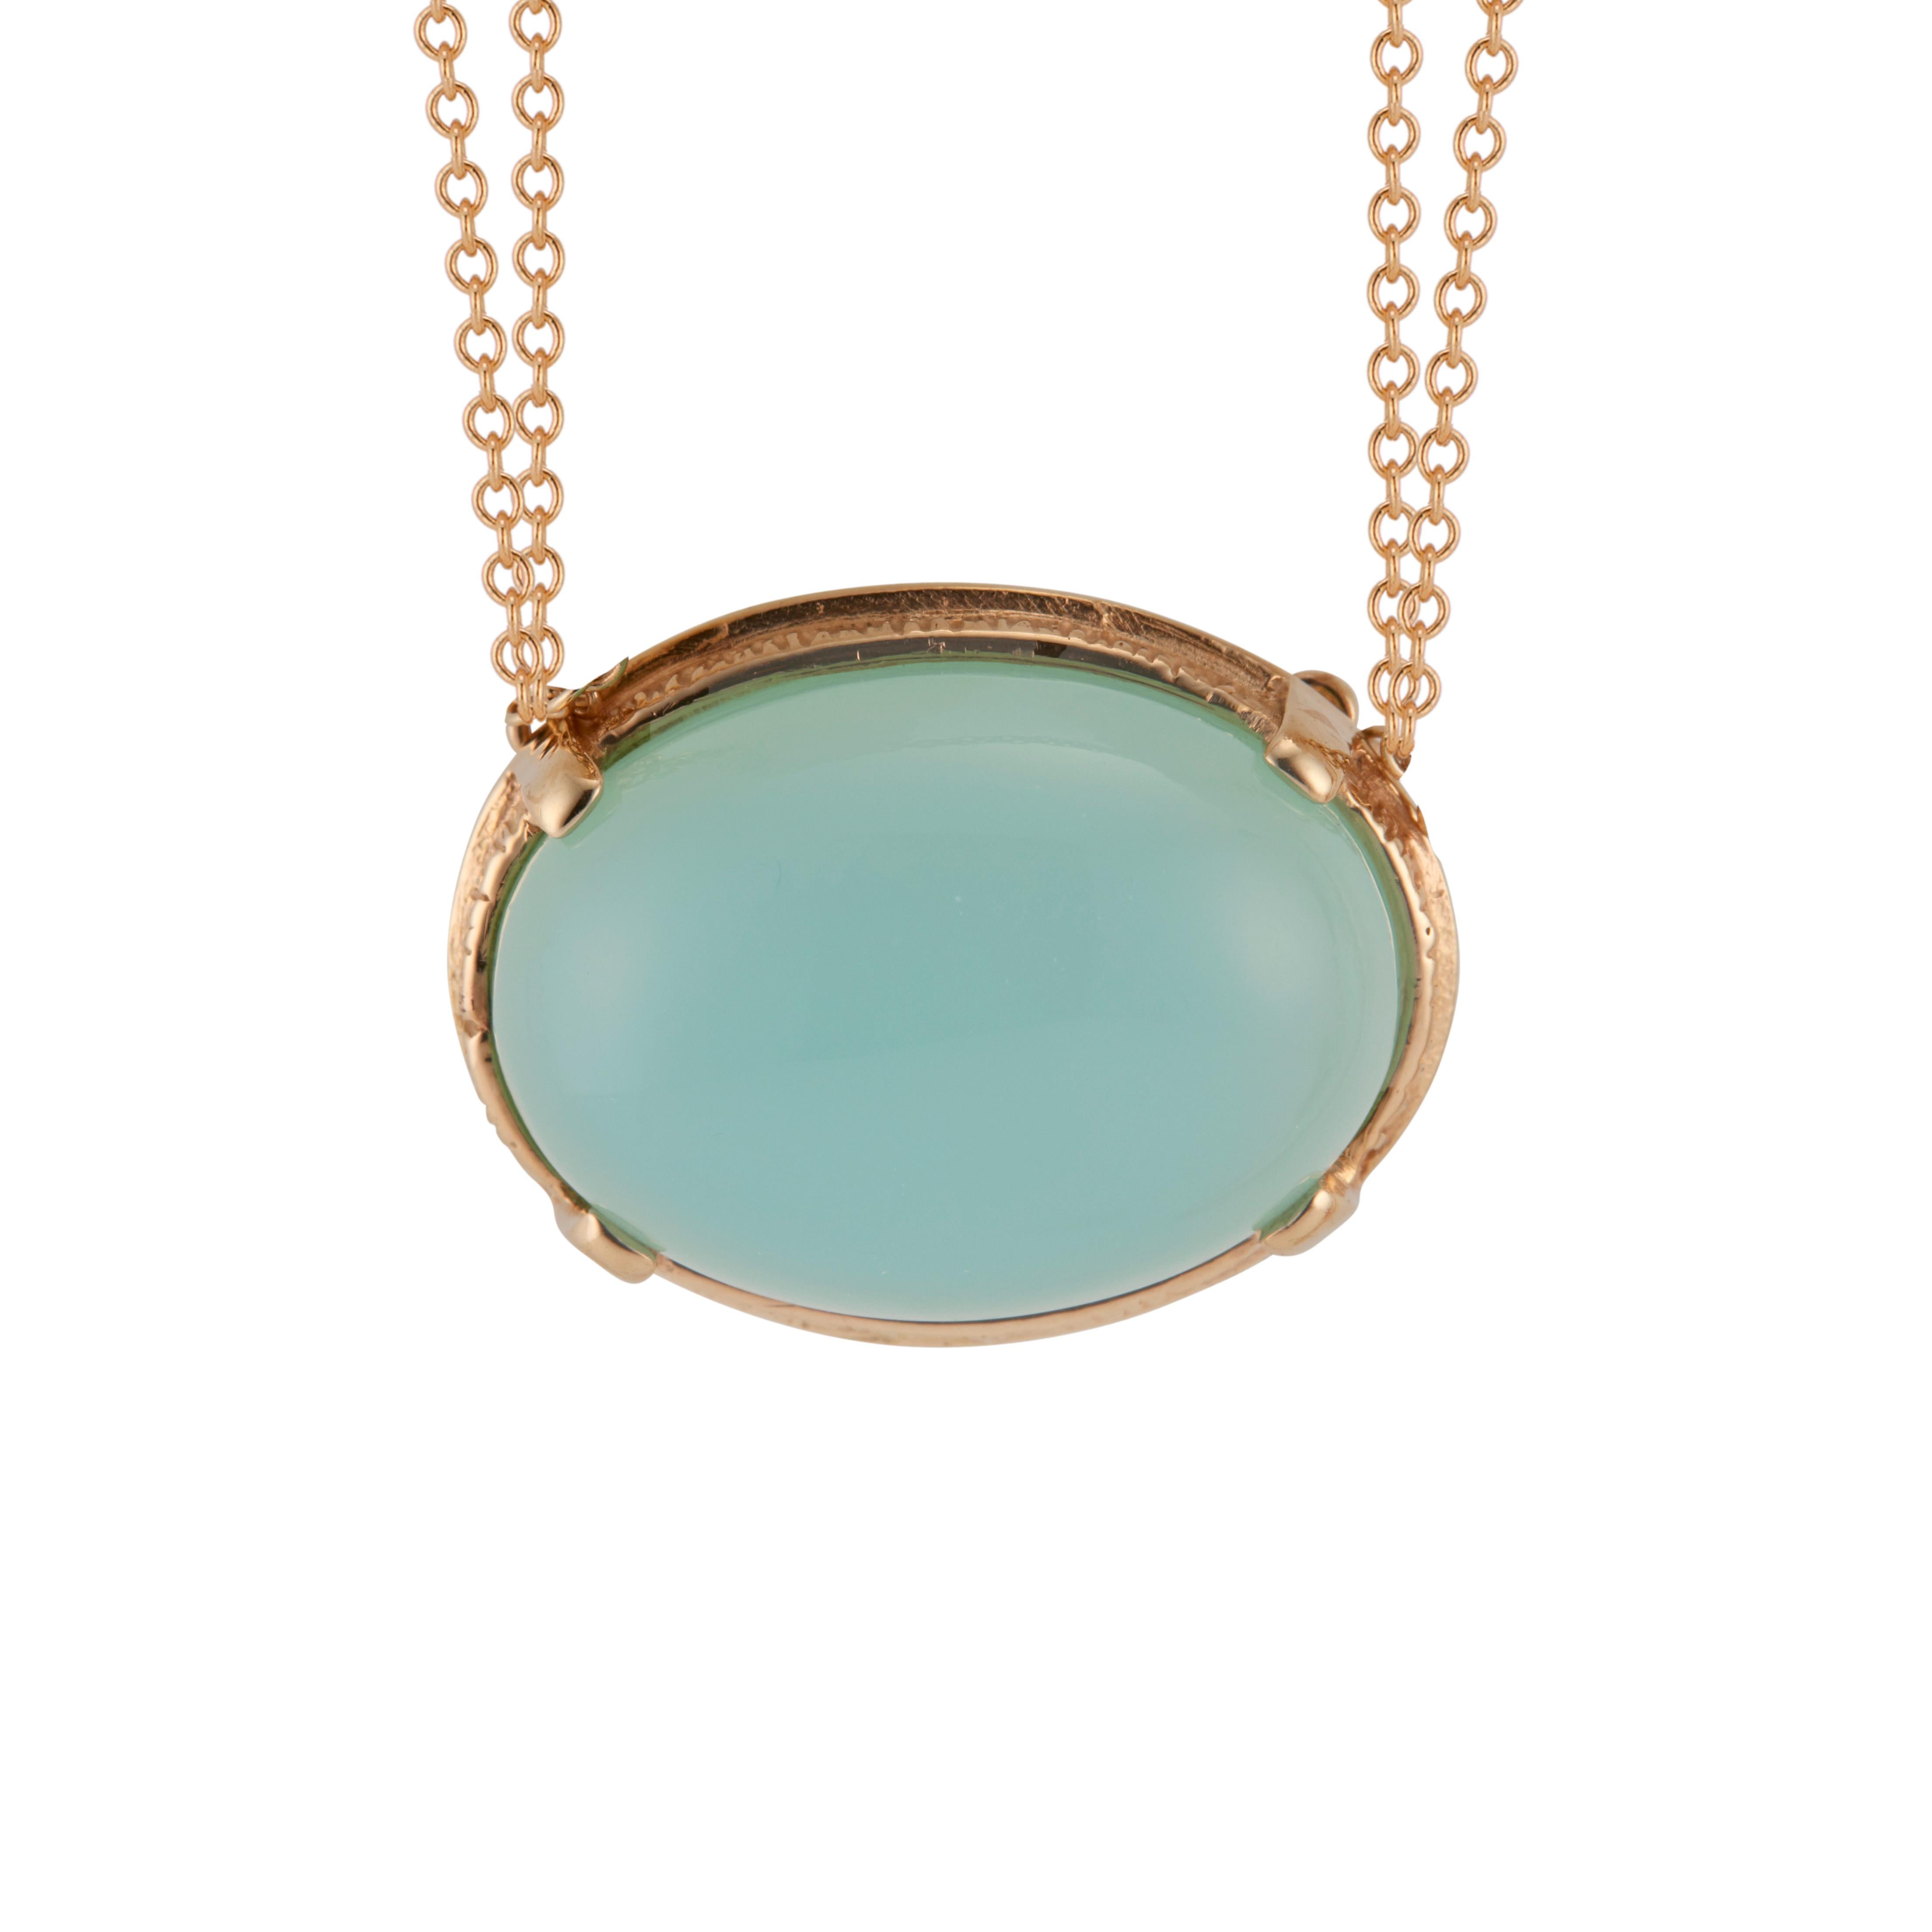 Oval cabochon blue chalcedony pendant necklace. 10.00ct oval blue center chalcedony set in a 14k yellow gold bezel with a 15.5 -16 inch 14k yellow gold double chain. Signed JJ.  

1 oval greenish blue cabochon chalcedony, approx. total weight